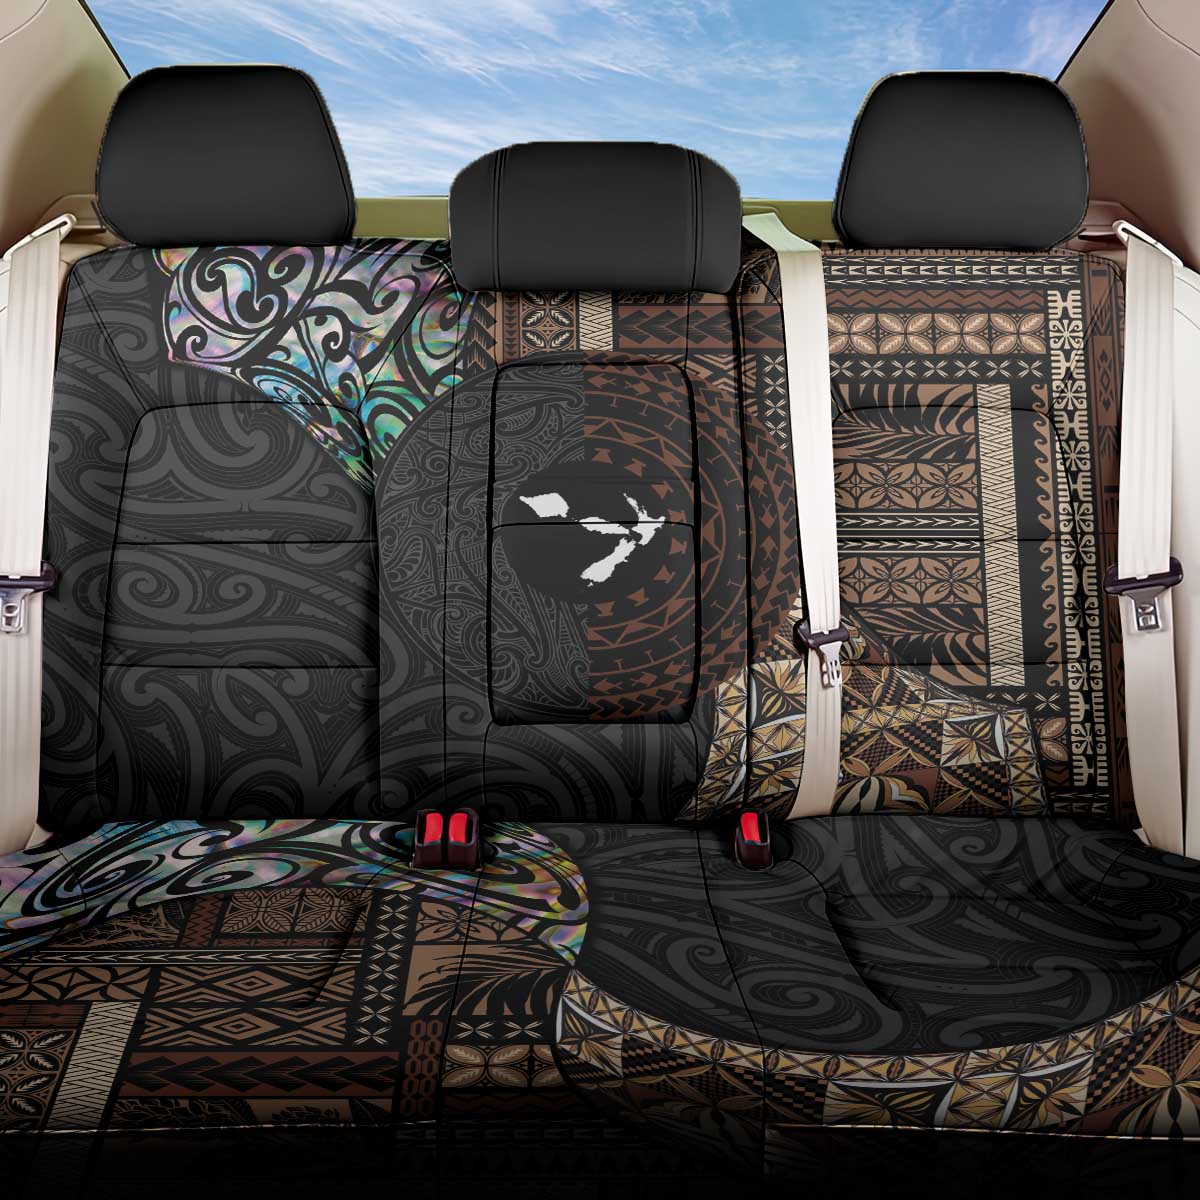 Samoa and New Zealand Together Back Car Seat Cover Siapo Motif and Maori Paua Shell Pattern